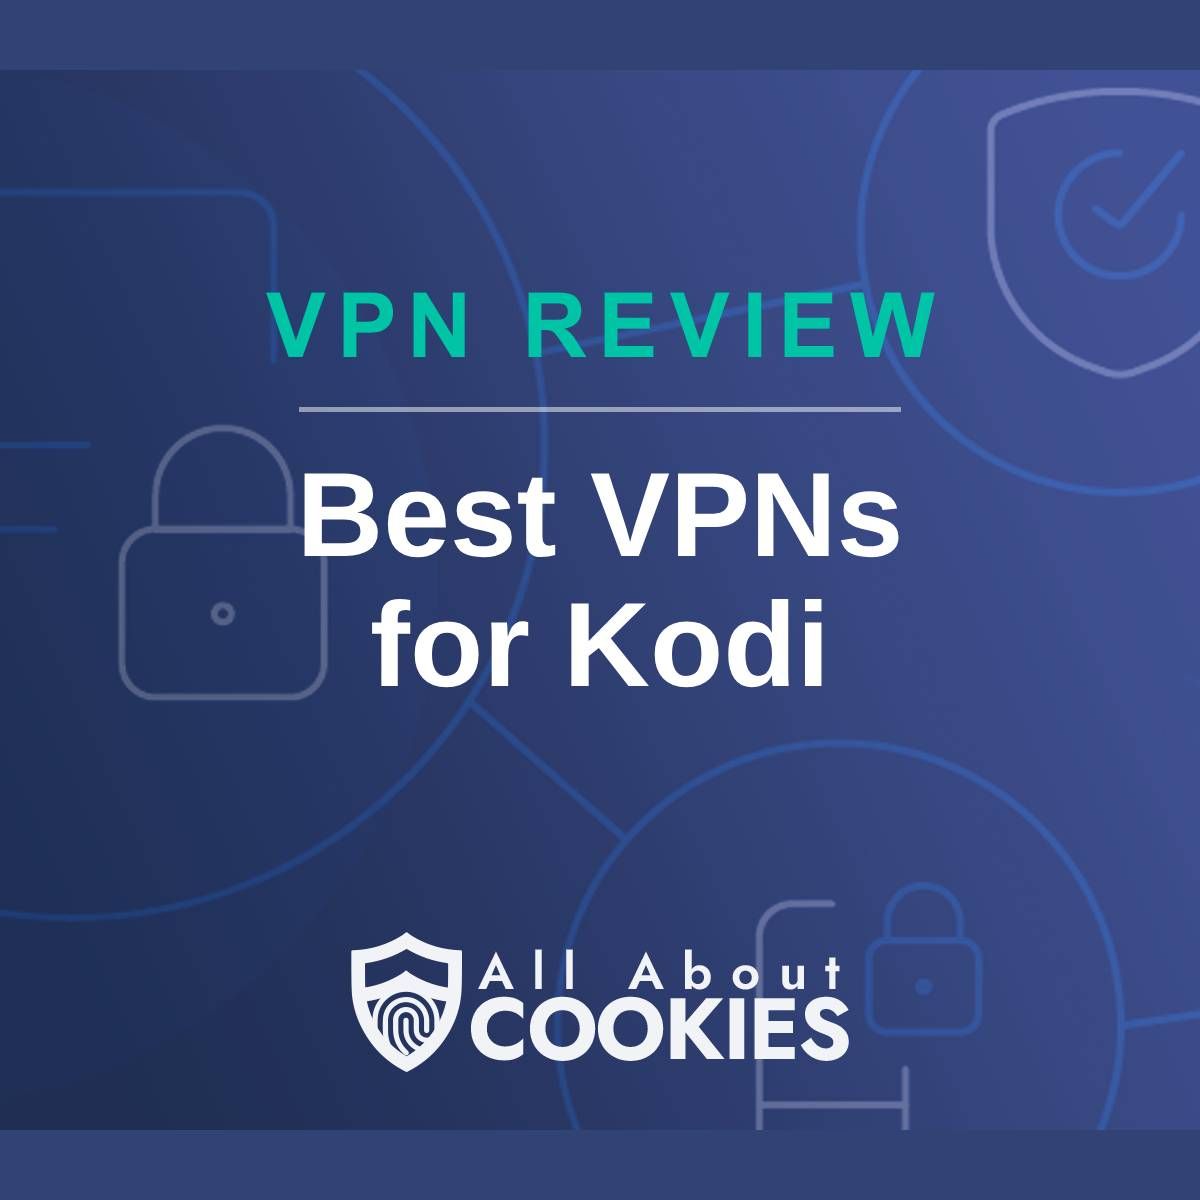 A blue background with images of locks and shields with the text &quot;VPN Review Best VPNs for Kodi&quot; and the All About Cookies logo. 